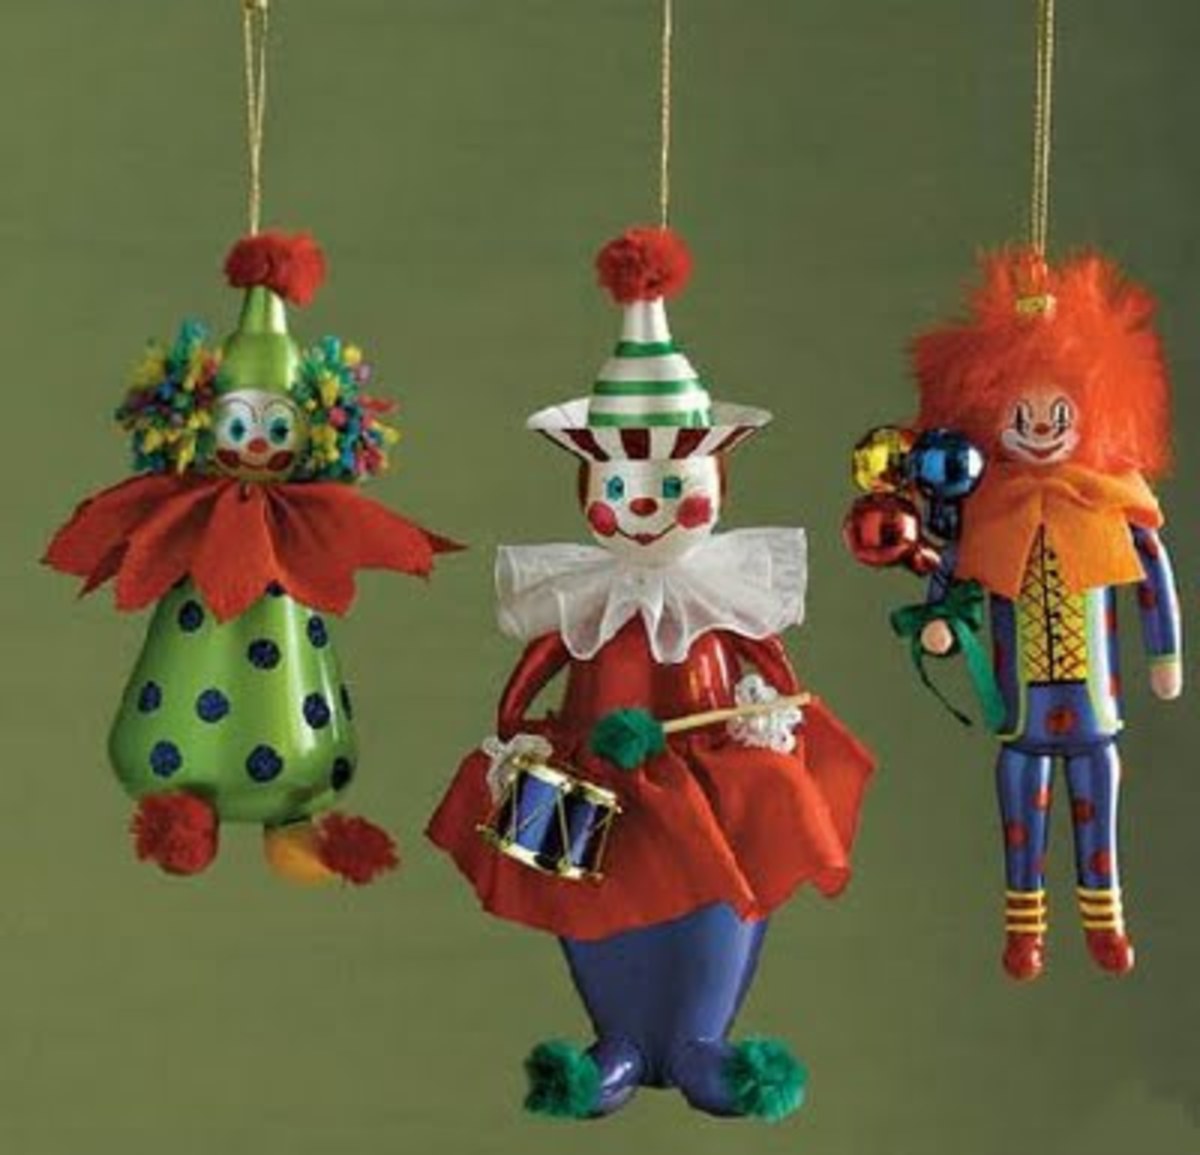 It was easier than I expected to find clown ornaments. Now that's scary!